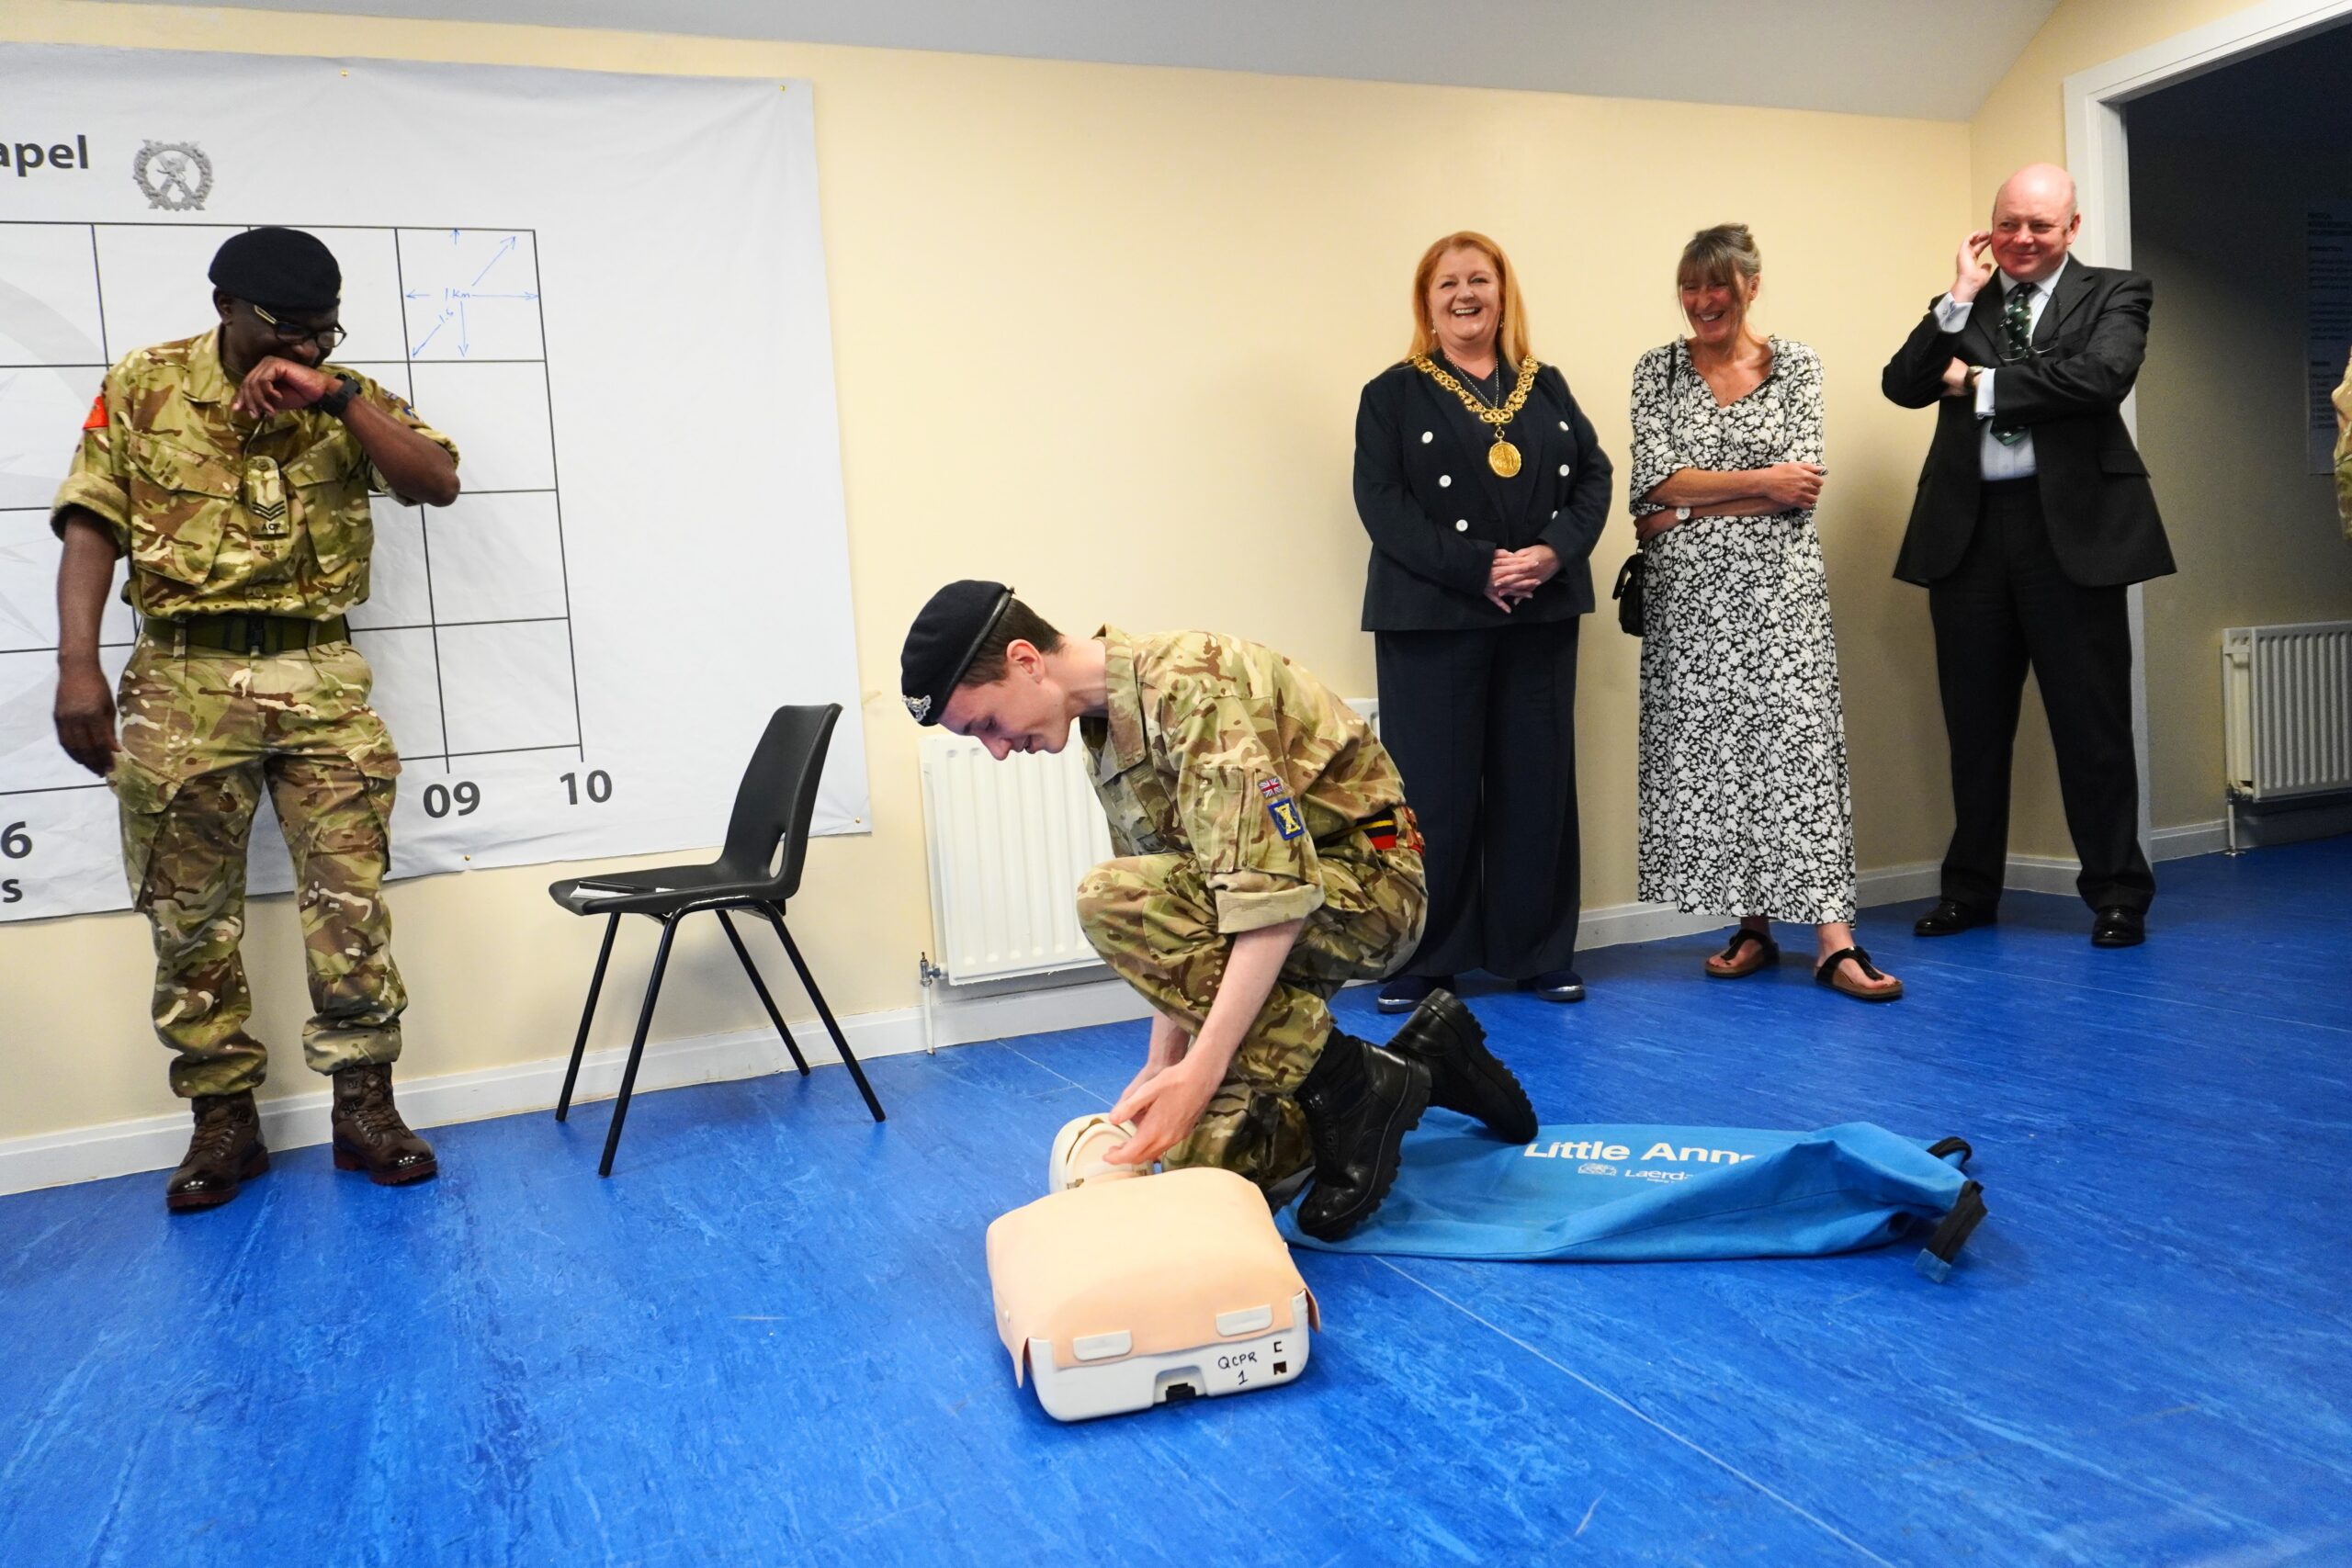 A male Cadet kneels in front of a Little Anne CPR dummy to begin First Aid practice, guided by the Instructor standing to his left and observed by the Lord Provost who stands behind him. Also behind the Cadet are the Chief and Deputy Chief Executives of Lowland RFCA.